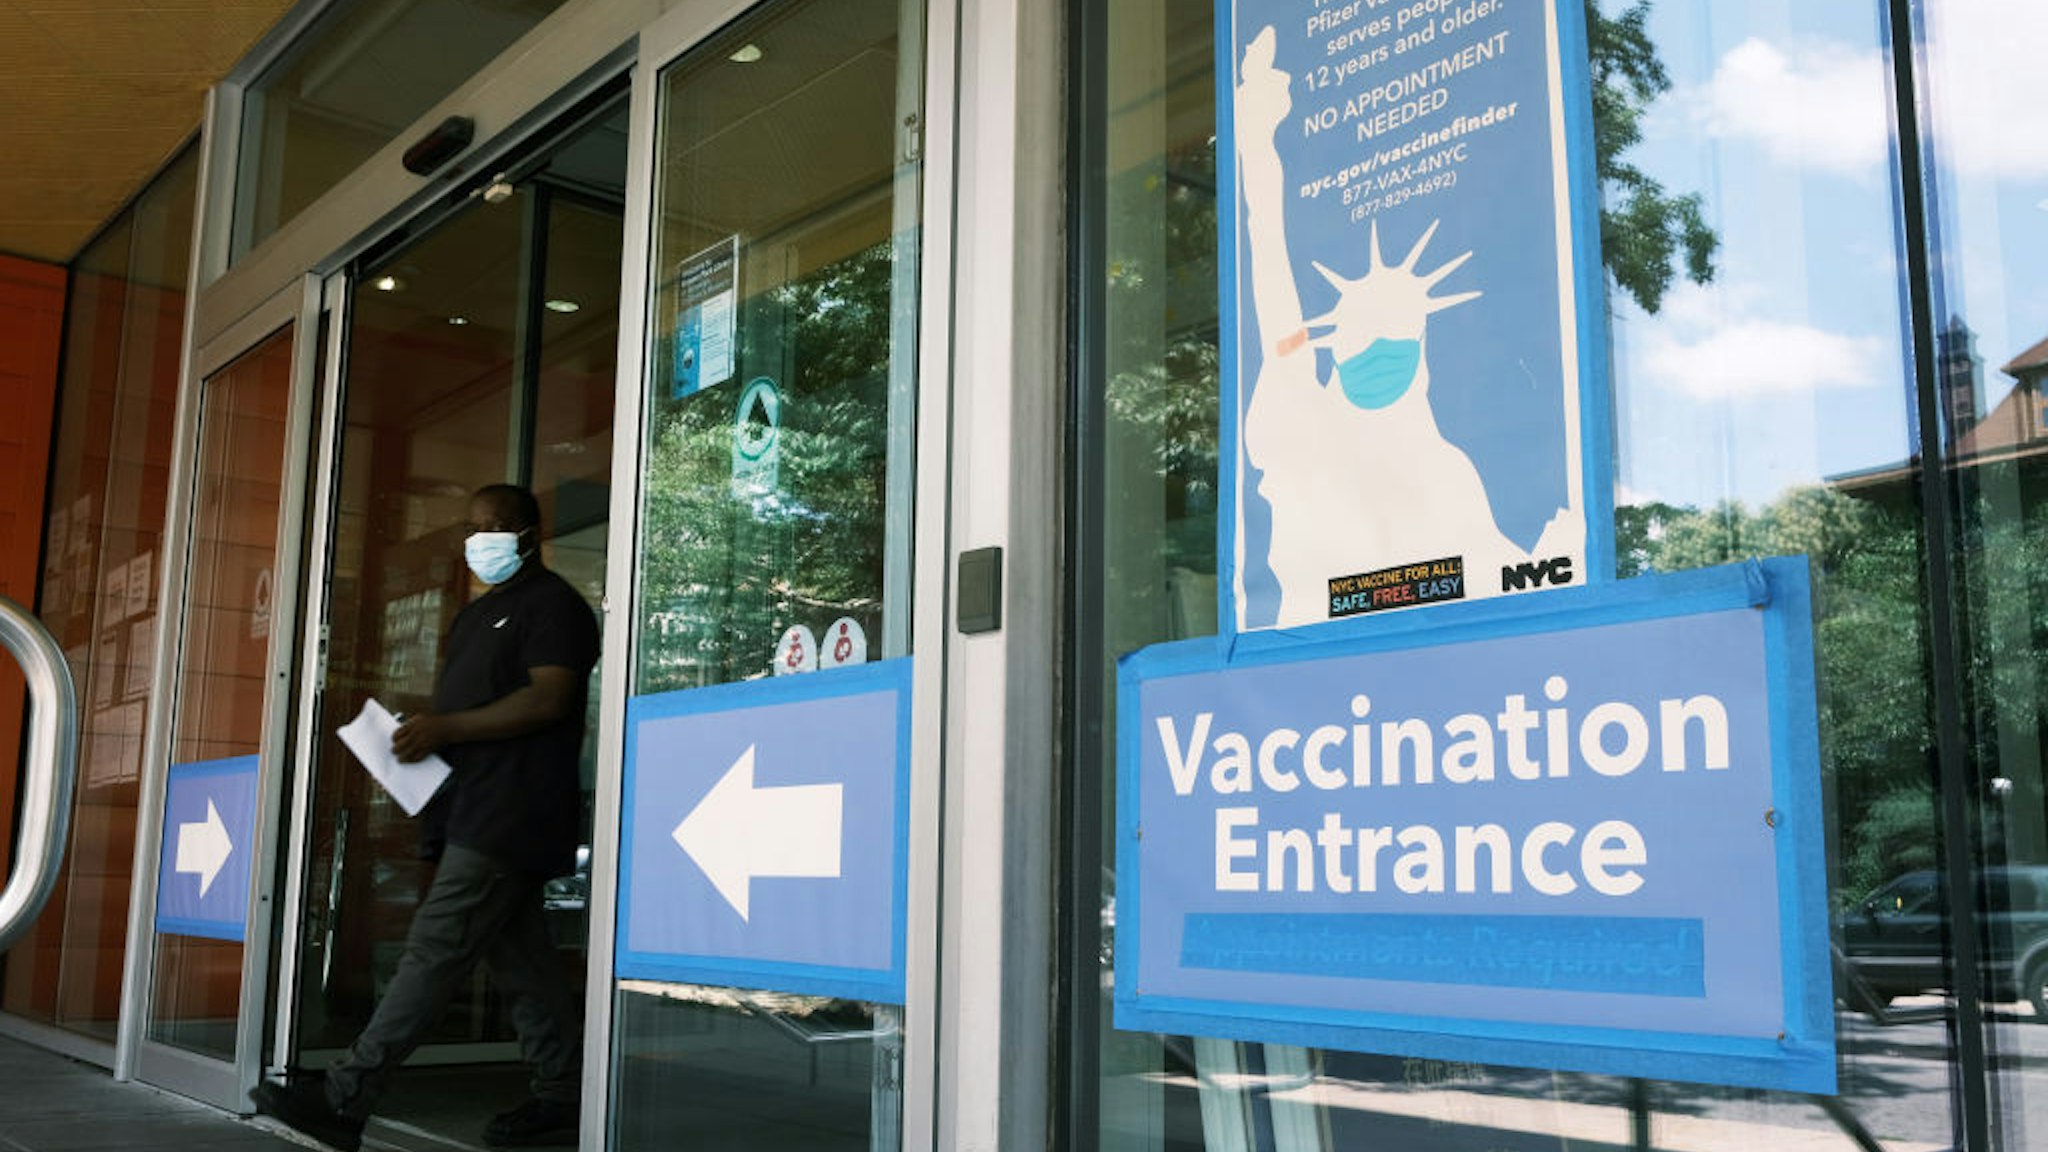 NEW YORK, NEW YORK - JULY 30: A city-operated mobile pharmacy advertises the COVID-19 vaccine in a Brooklyn neighborhood on July 30, 2021 in New York City. Due to the rapidly spreading Delta variant, New York City Mayor Bill de Blasio has announced that the city will require all city workers to be vaccinated or tested weekly for COVID-19 and the city will now pay any individual $100 to get the shot. (Photo by Spencer Platt/Getty Images)